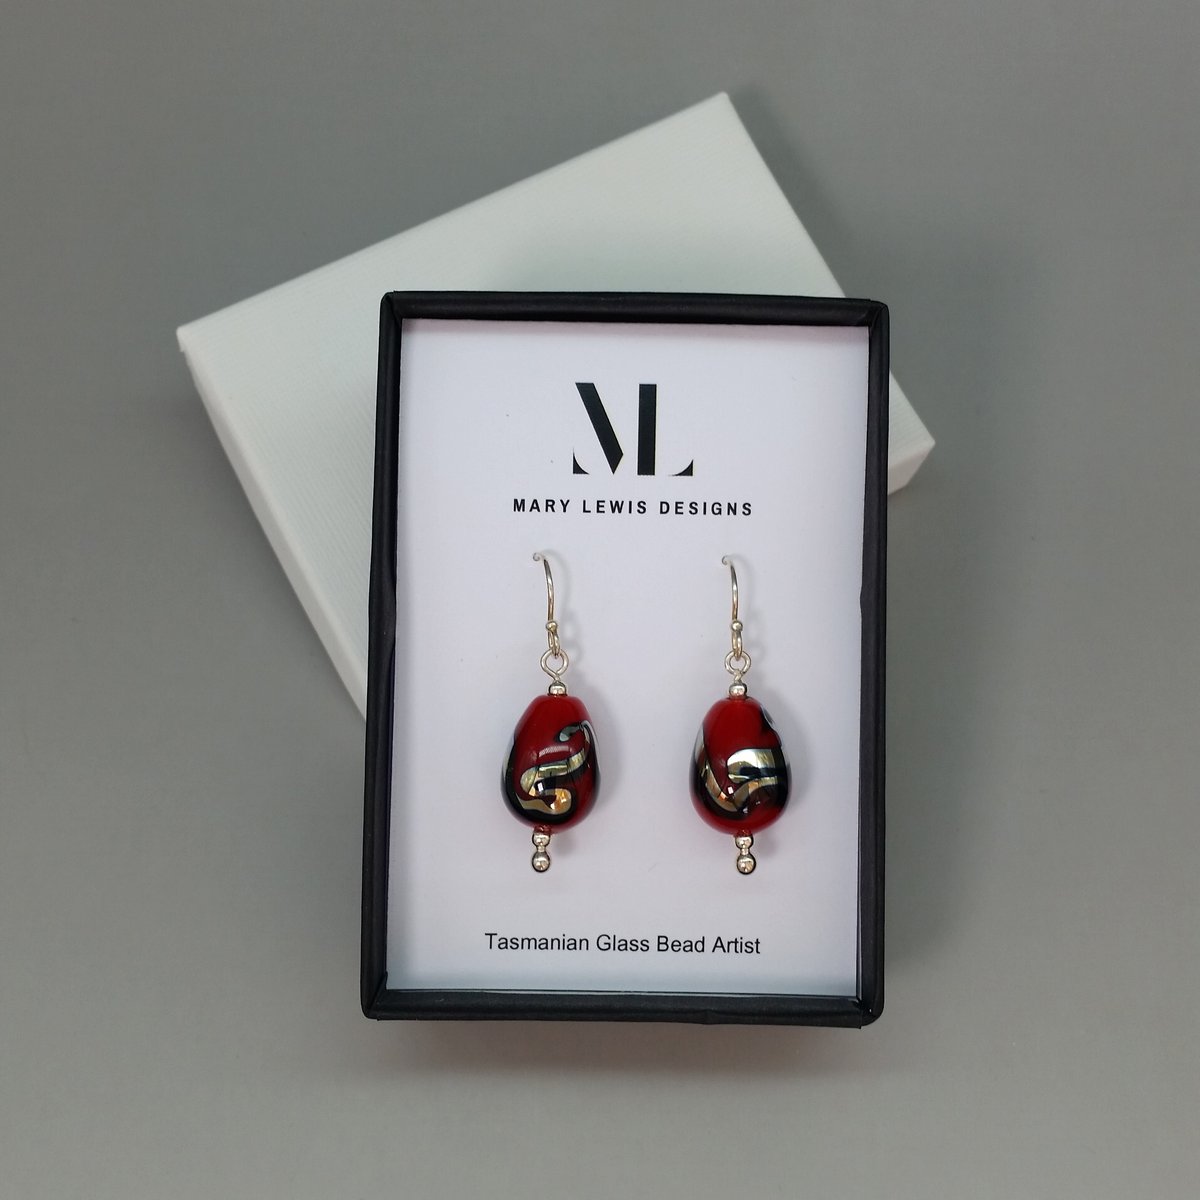 "Fire and Ice" Earrings